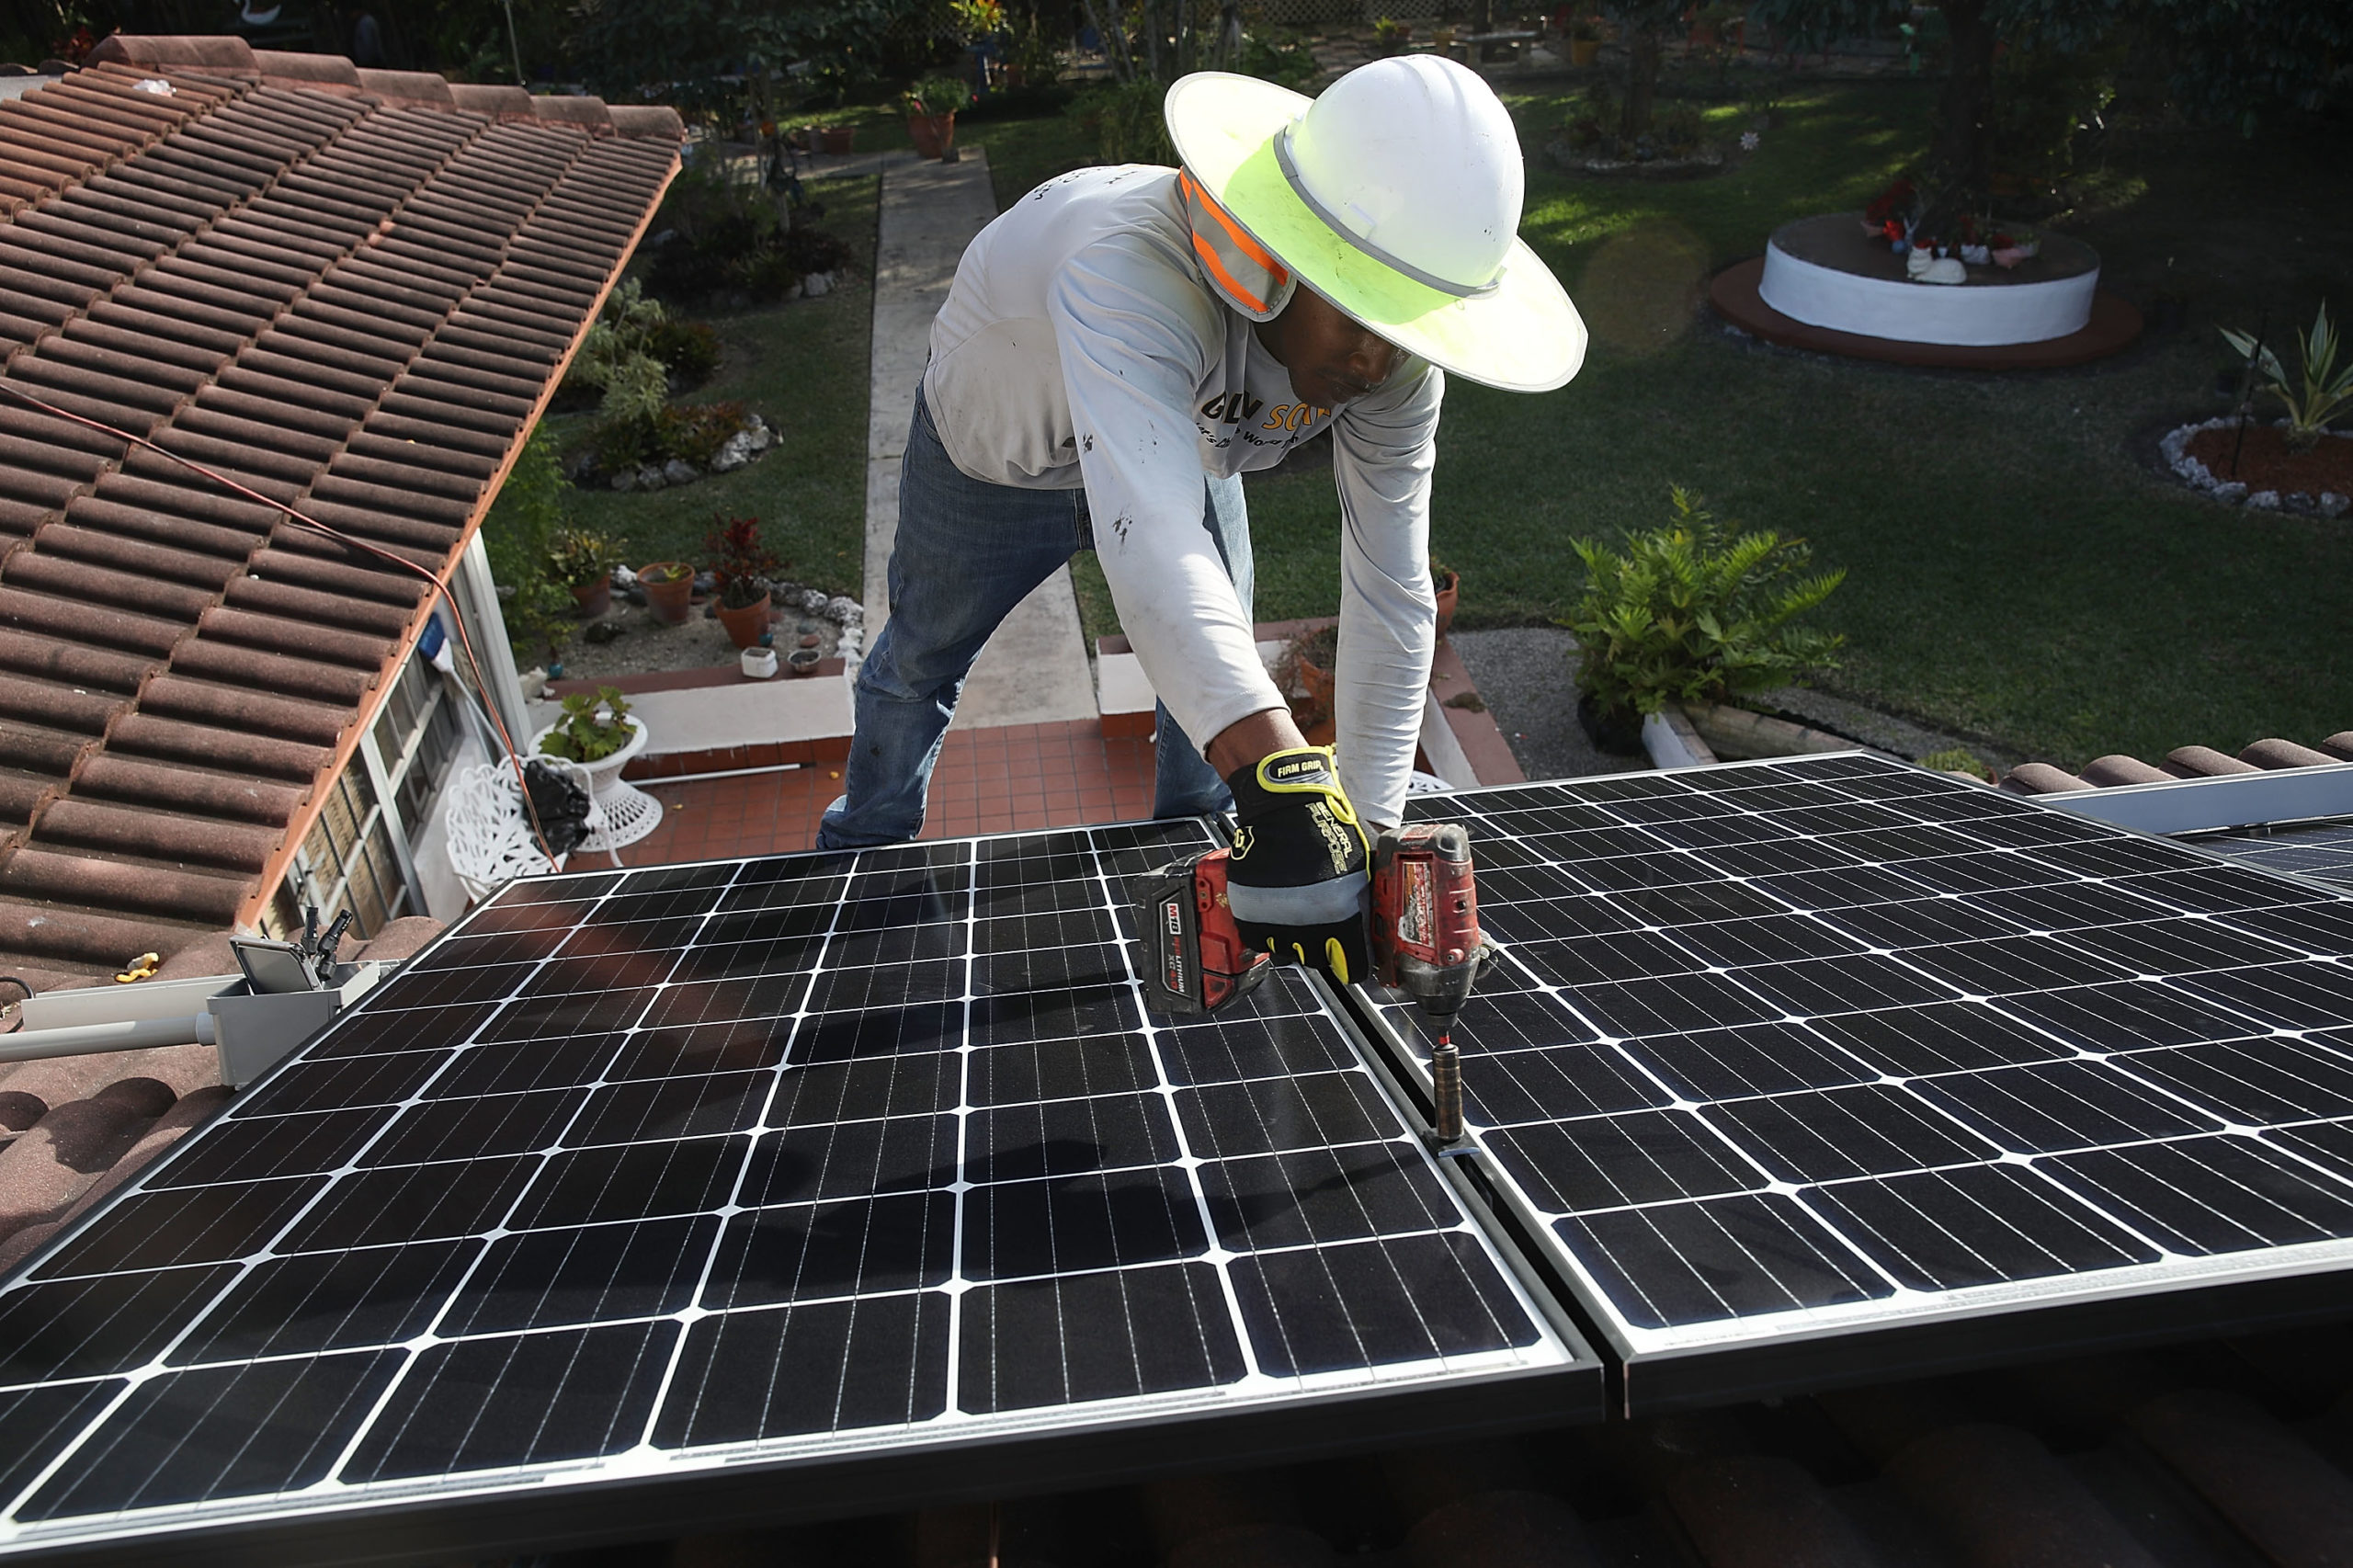 A worker from the Goldin Solar company installs a solar panel system in Palmetto Bay, Florida, in 2018. (Joe Raedle/Getty Images)